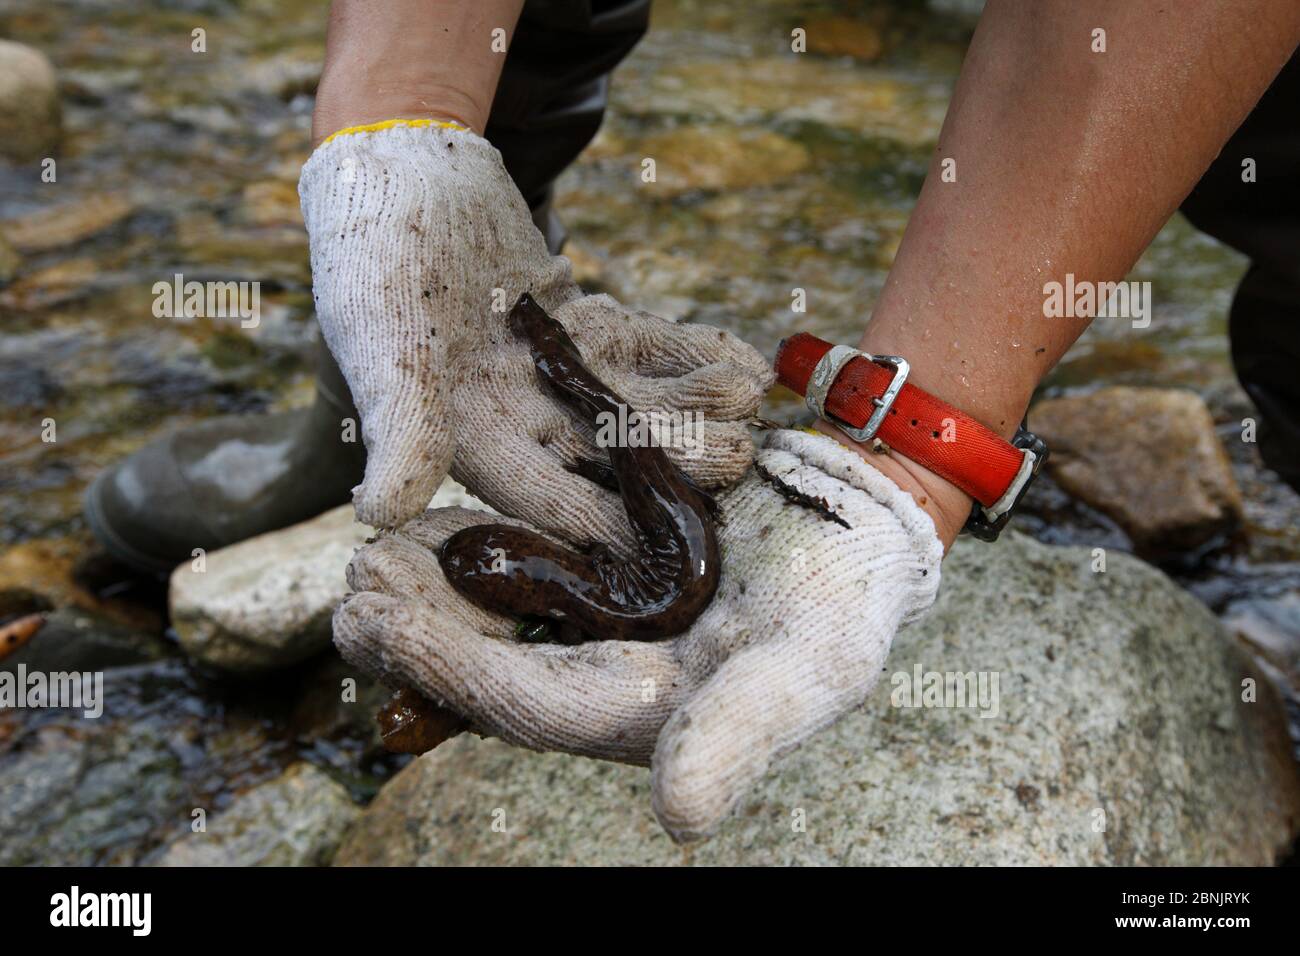 Scientist holding young Japanese giant salamander (Andrias japonicus) Honshu, Japan. August 2010. Stock Photo